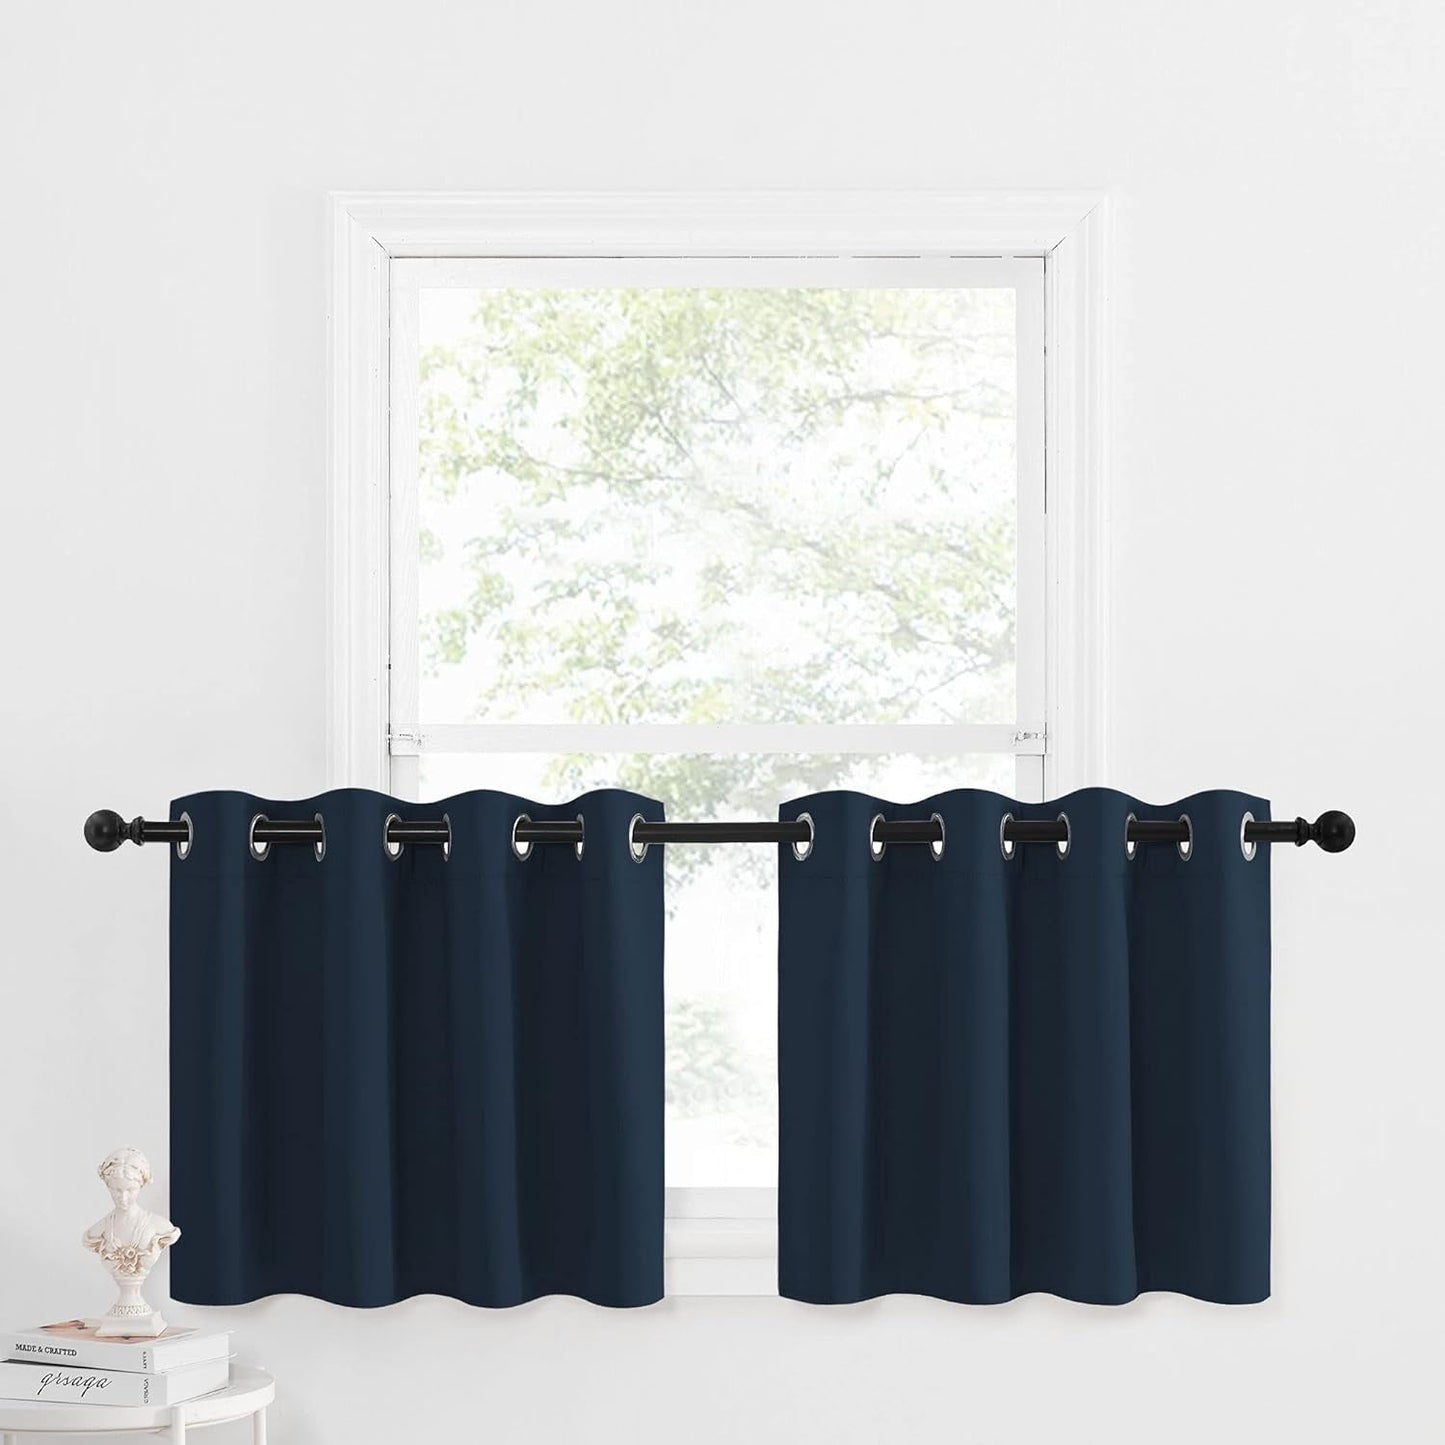 NICETOWN Kitchen Window Blackout Curtain - Grommet Cafe Short Window Valance Small Panel Drape for Nursery/Bay Window/Kitchen/Bathroom, W52 by L24.2 Inches Header, Navy, 1 PC